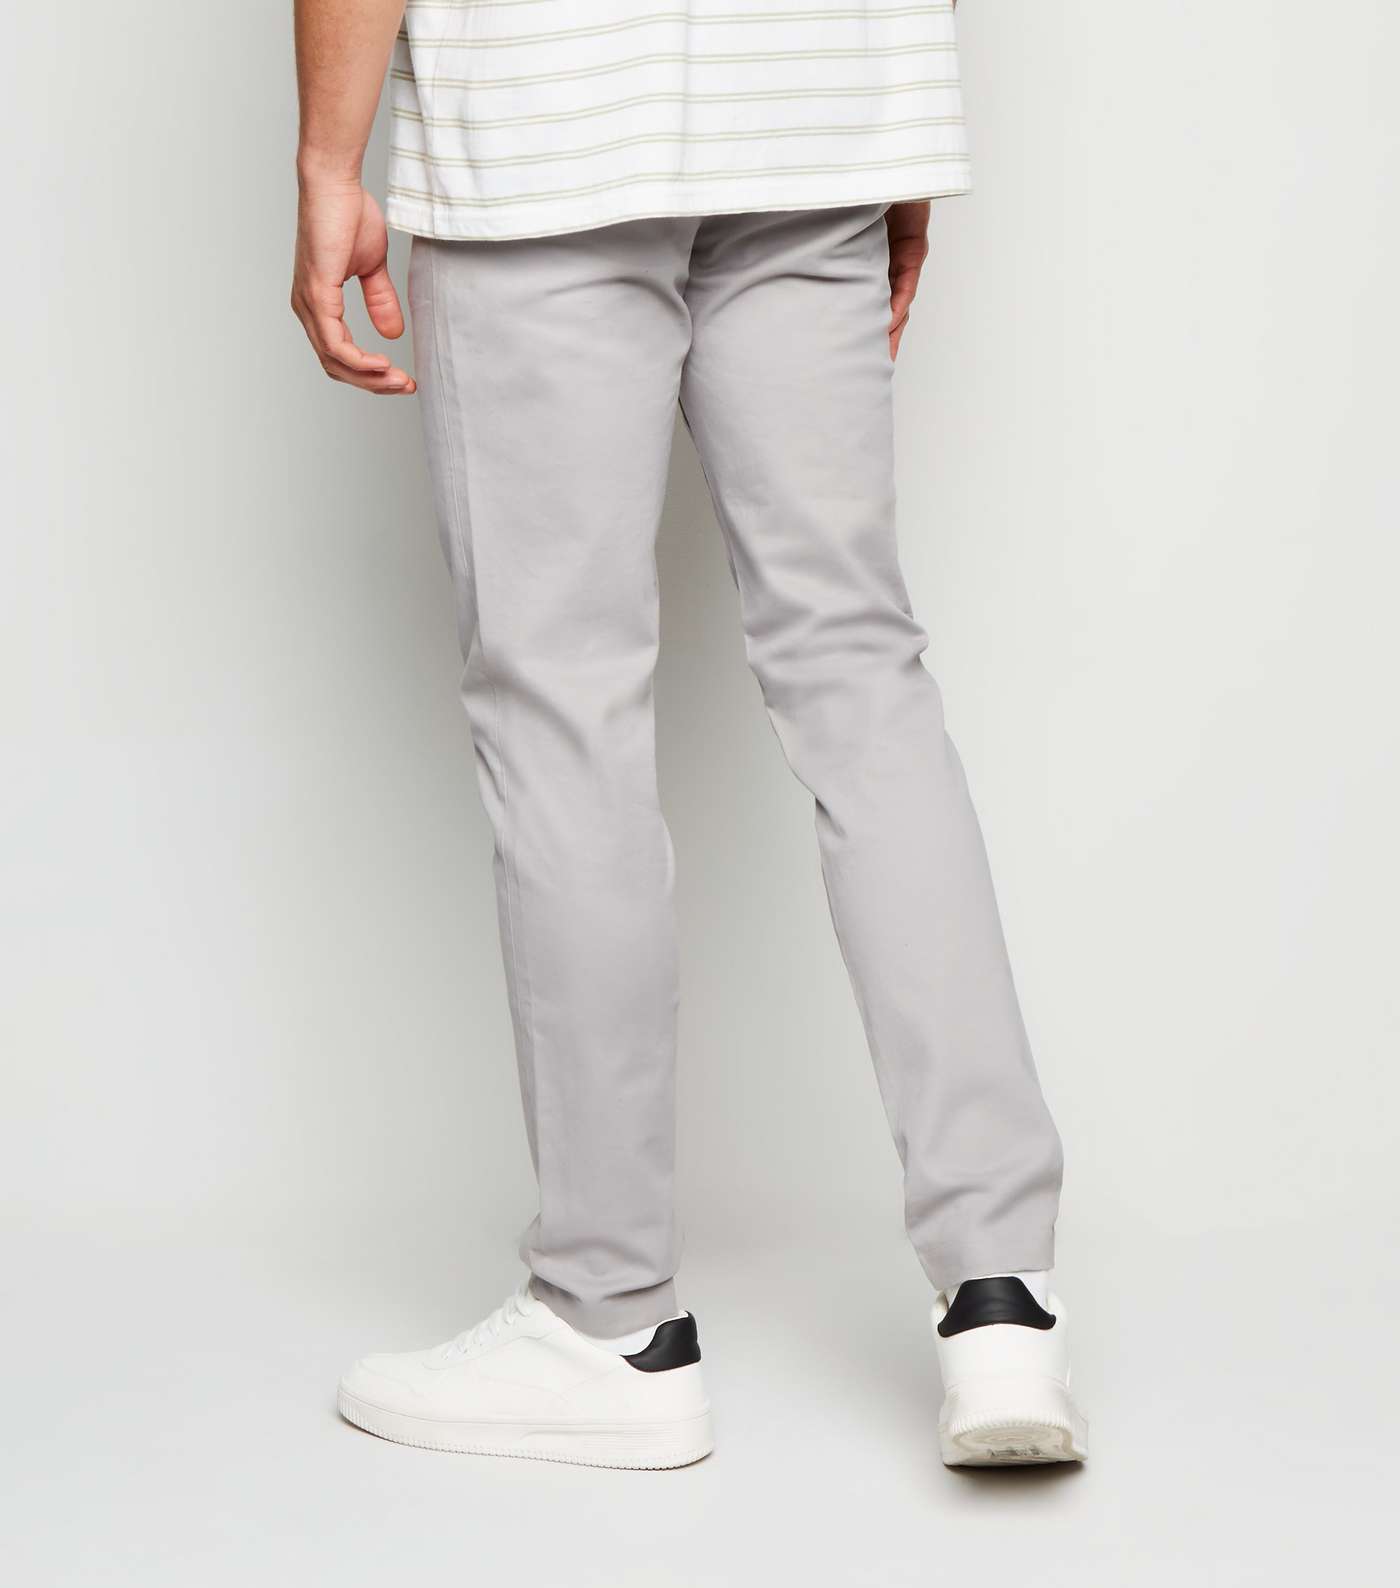 Pale Grey Cotton Blend Skinny Chinos Image 3